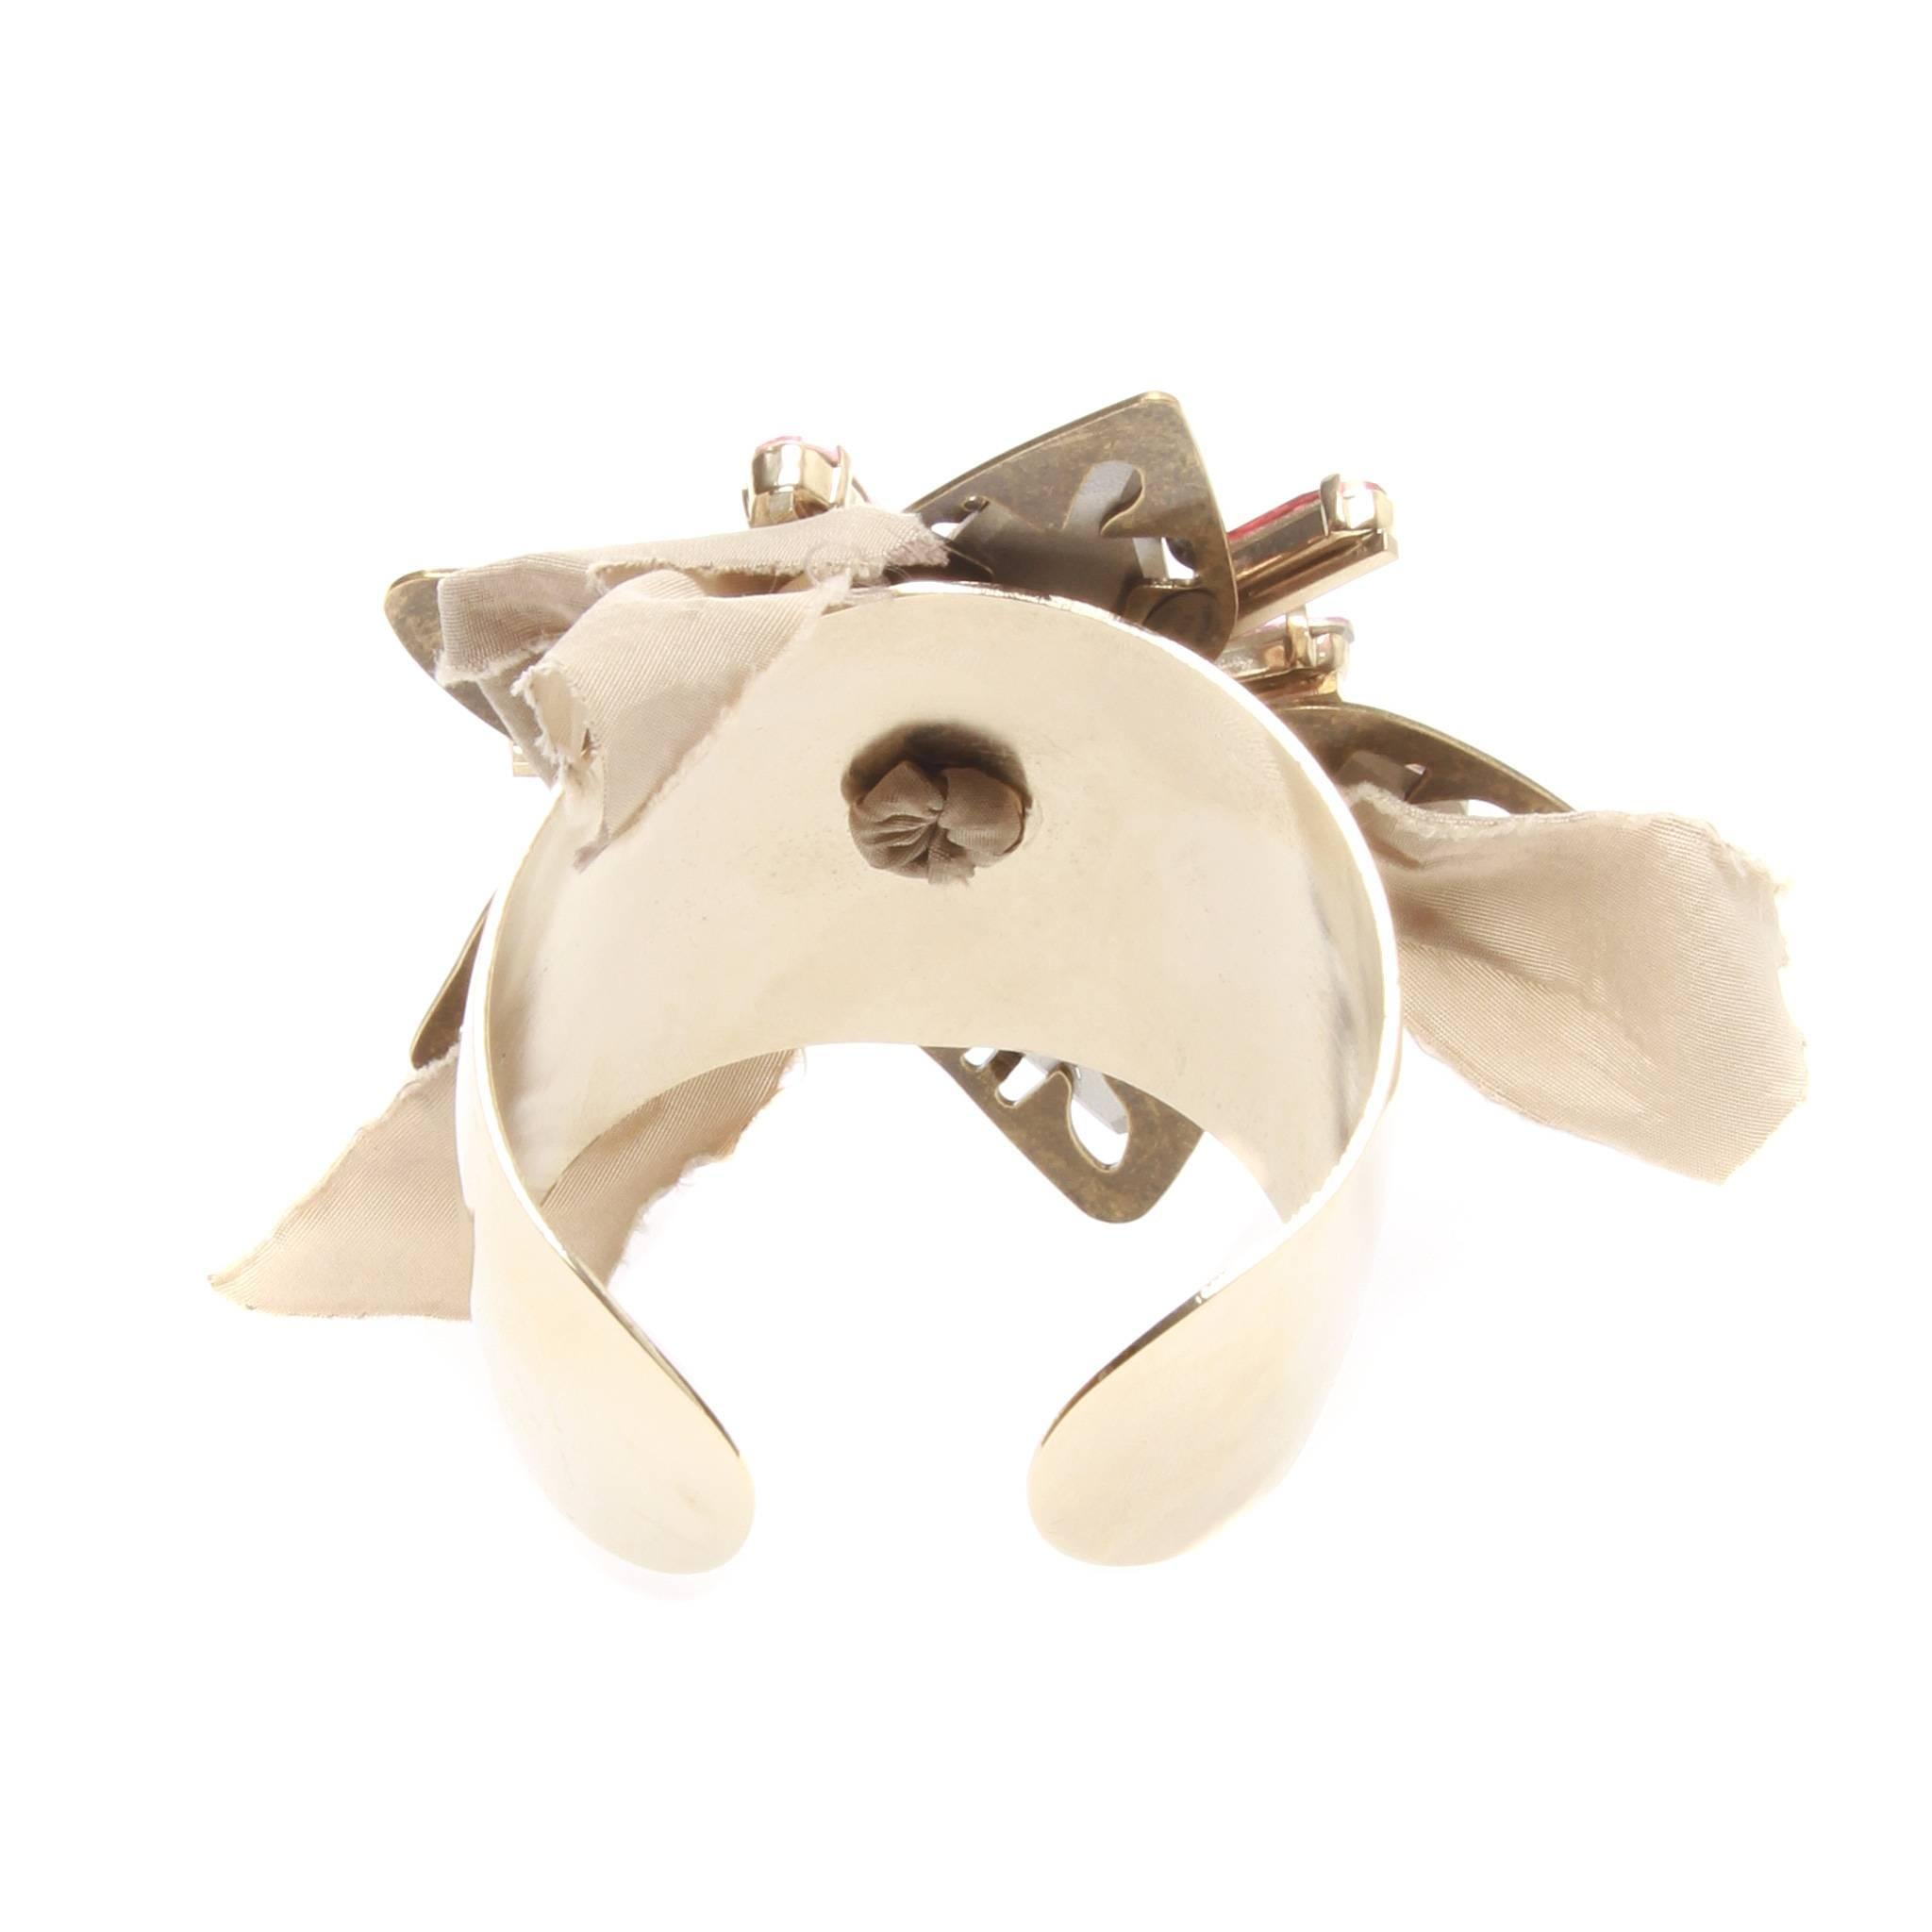 Lanvin gold-tone metal open cuff design affixed with a flower centrepiece formed of Swarovski crystals, metal and beige silk. 

Made in France. Comes with authentic box.

